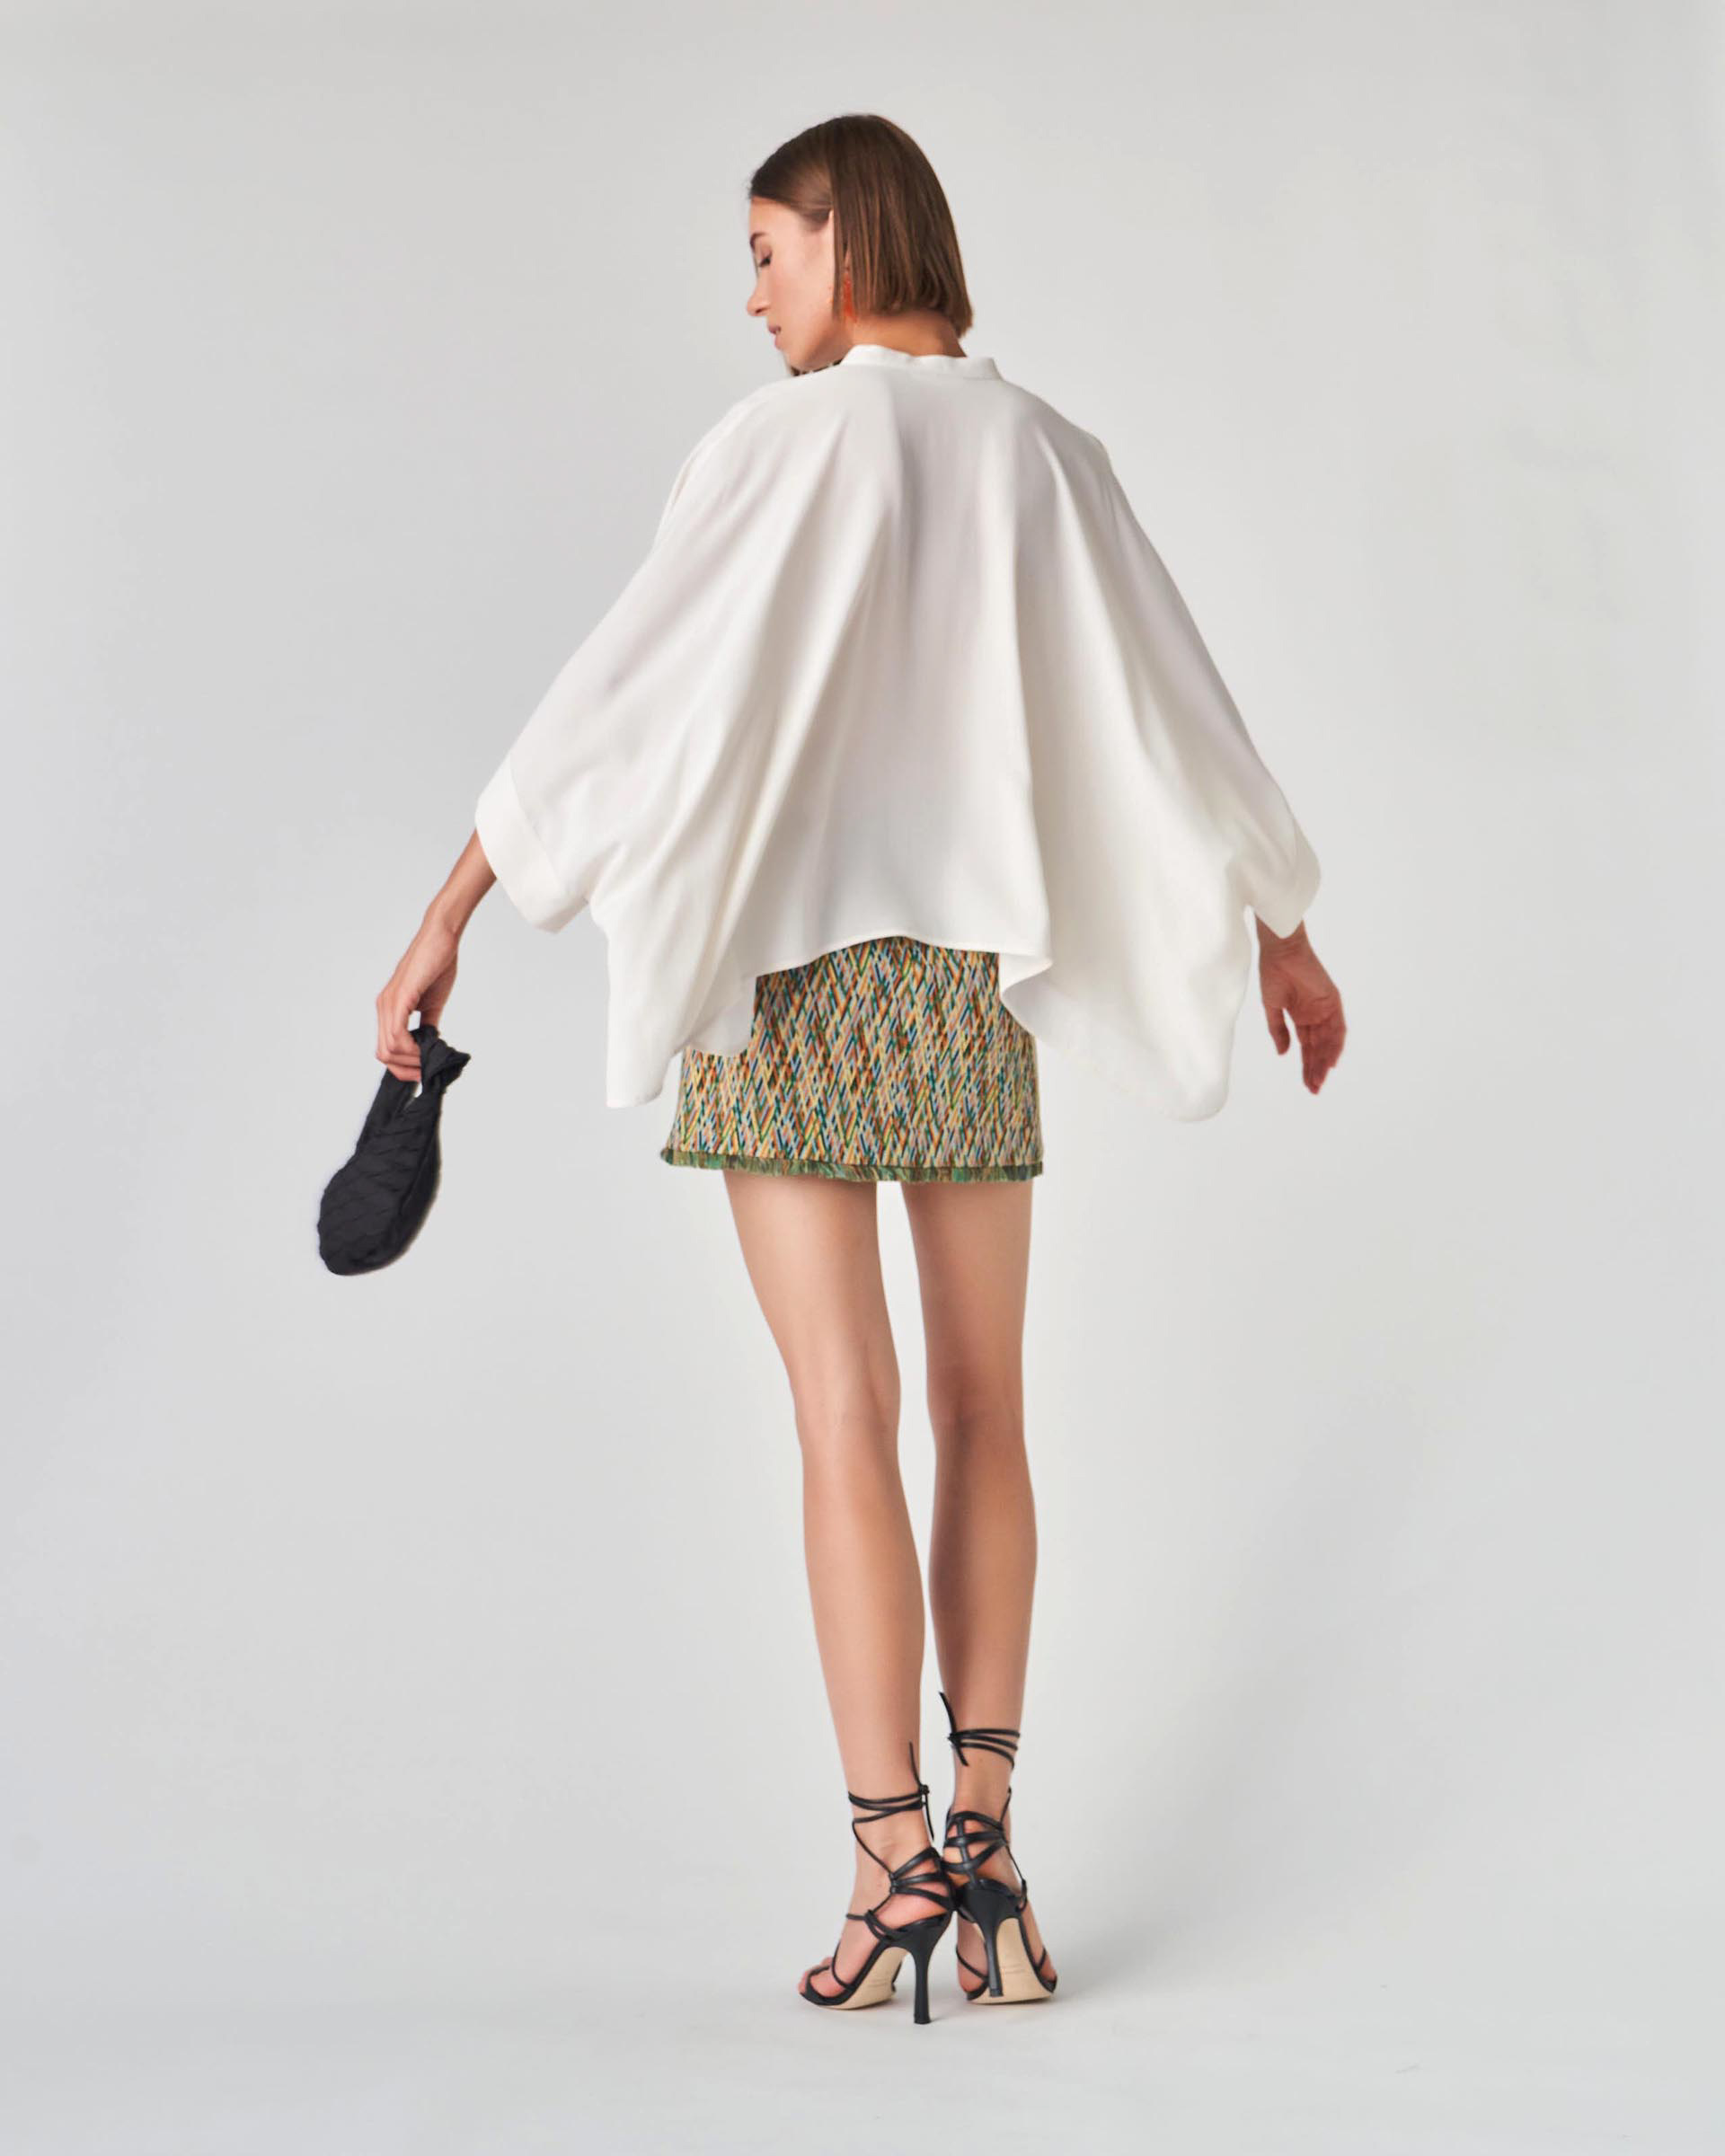 The Market Store | Over Blouse With Bat Sleeves